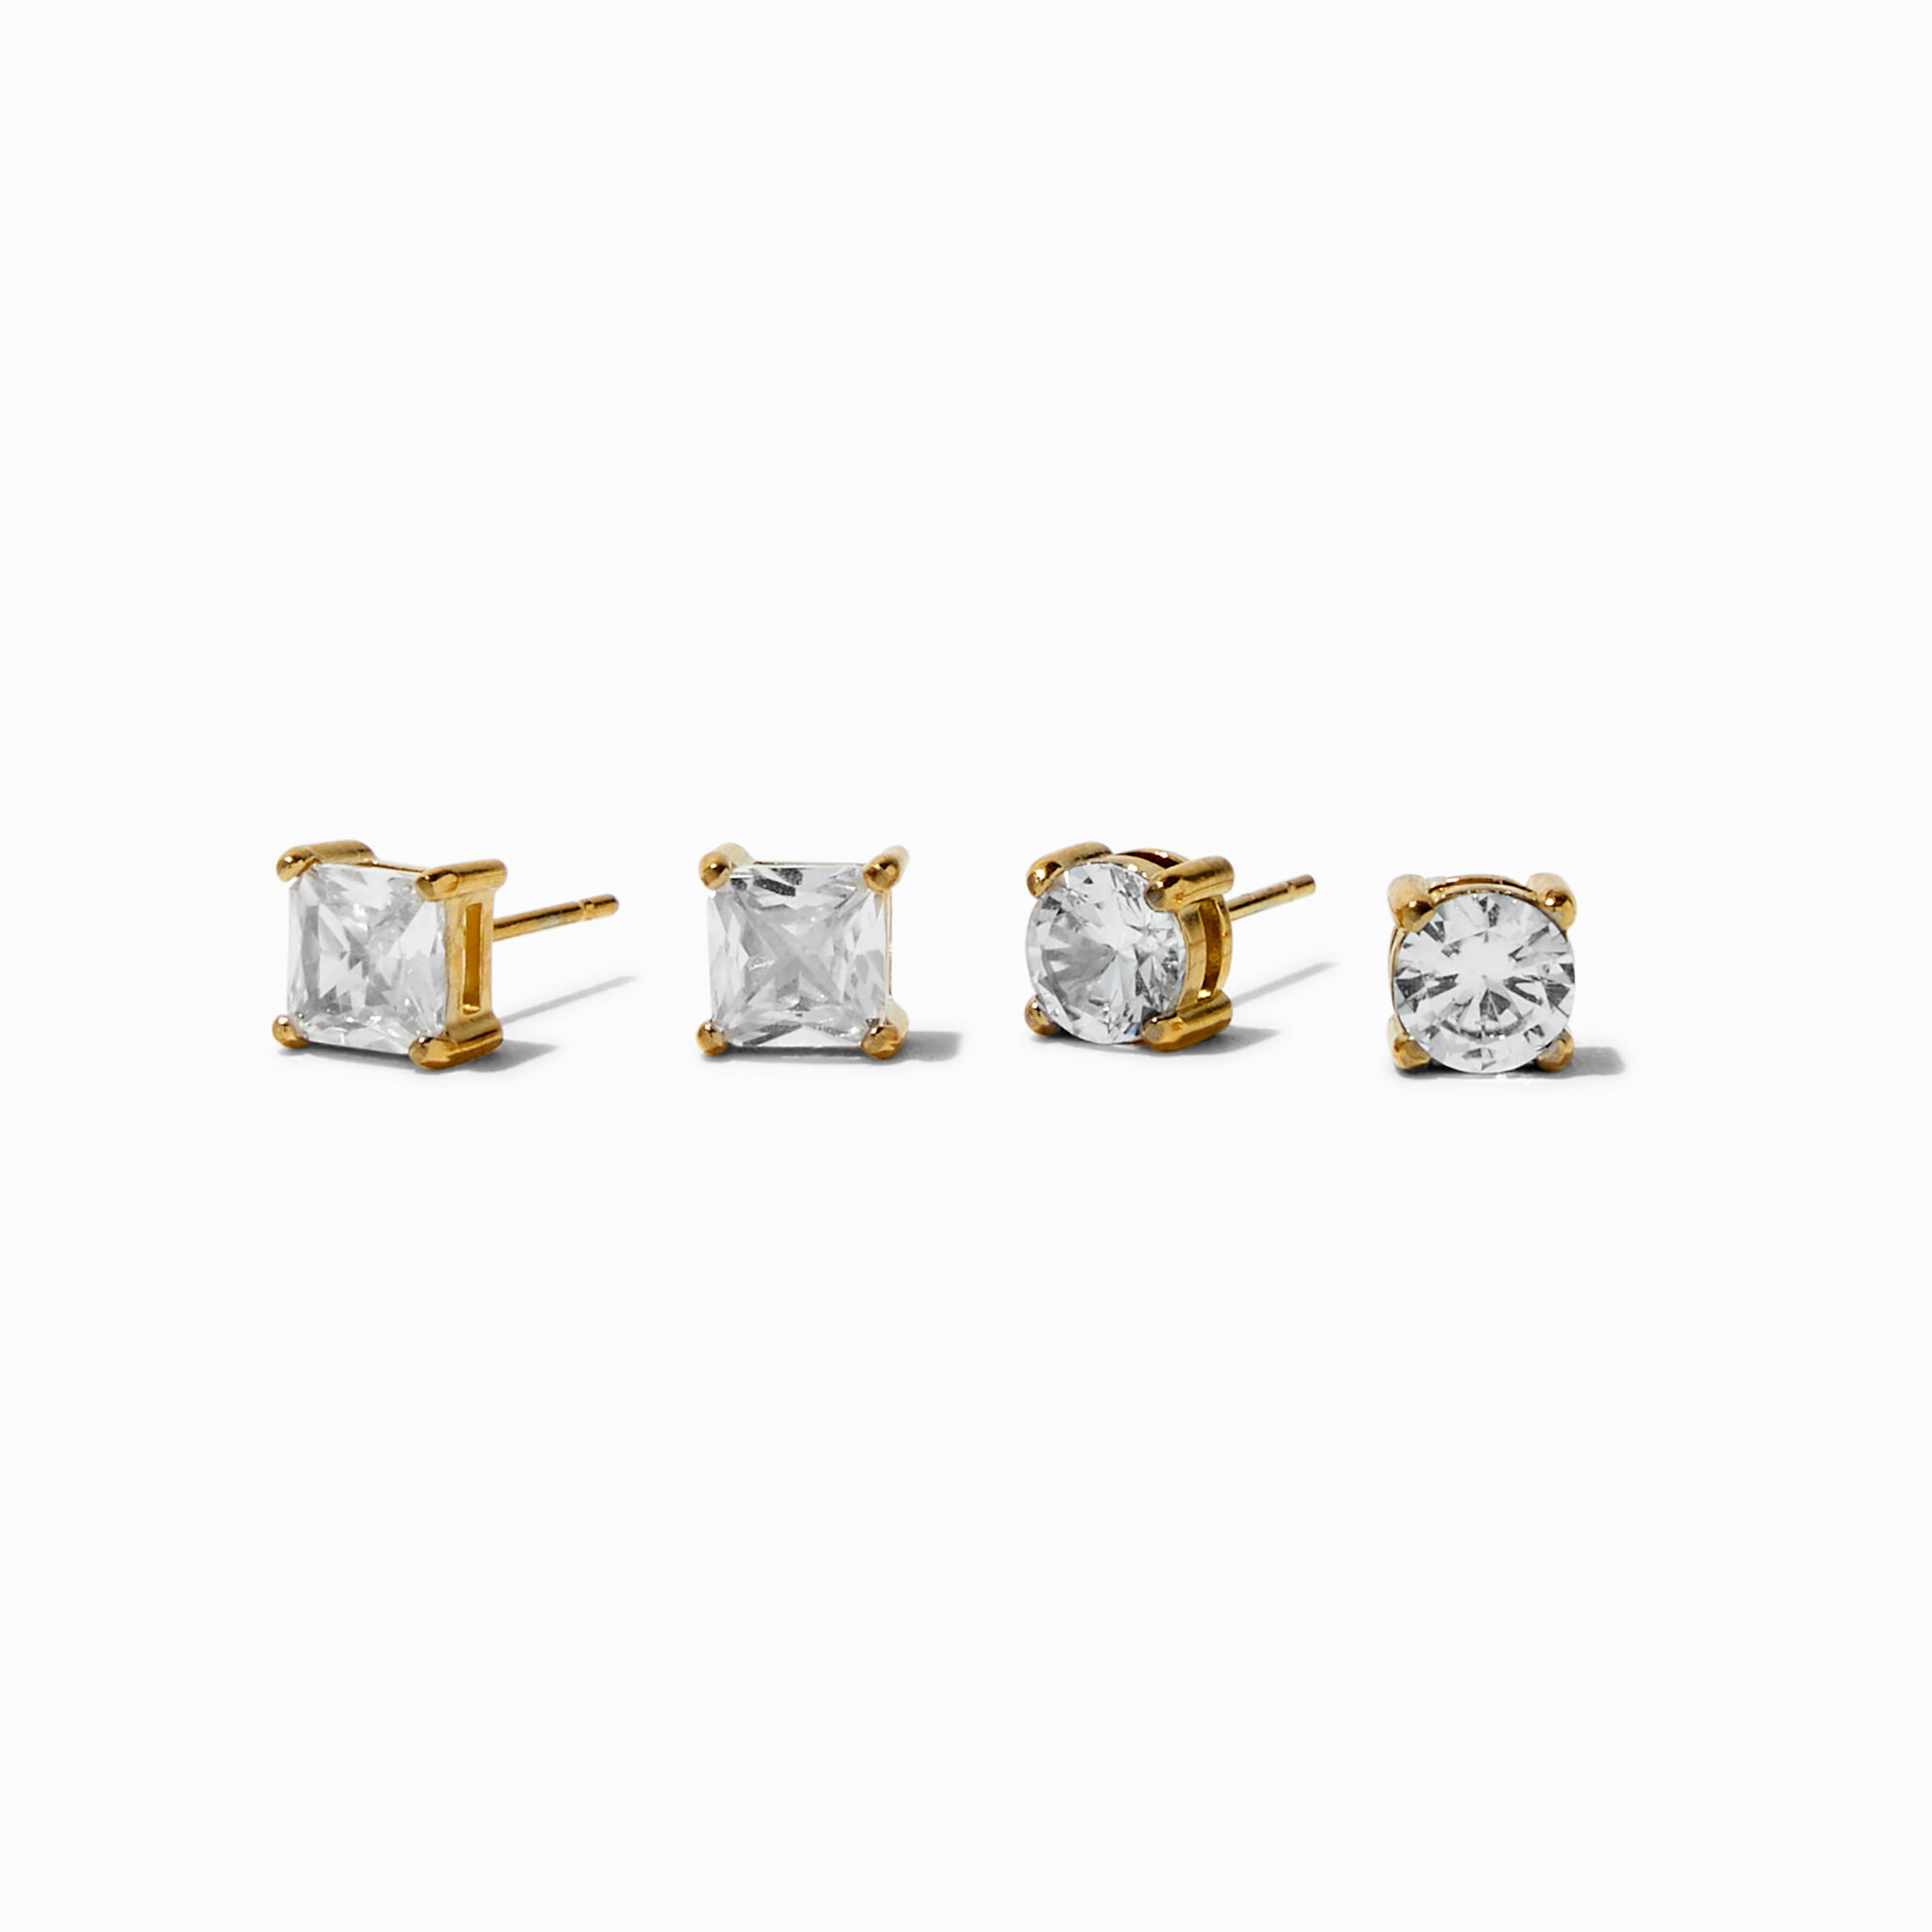 View Claires Tone Stainless Steel Cubic Zirconia 6MM Square Round Stud Earrings 2 Pack Gold information